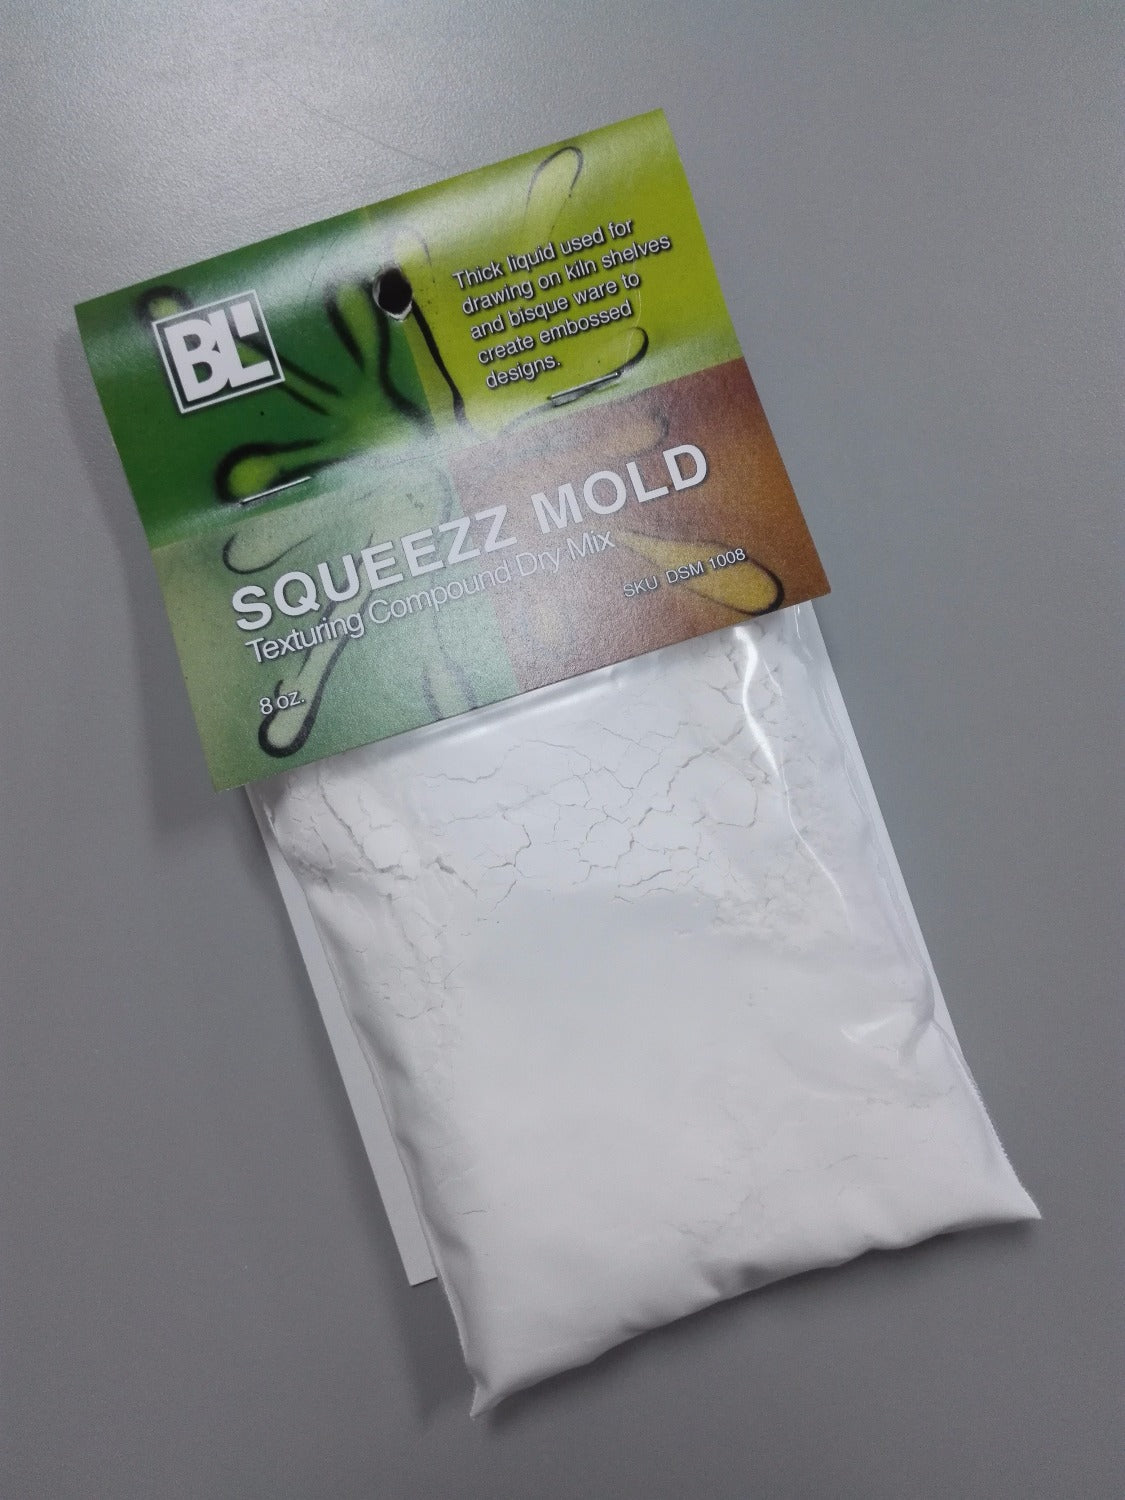 BL SQUEEZE MOLD 8oz